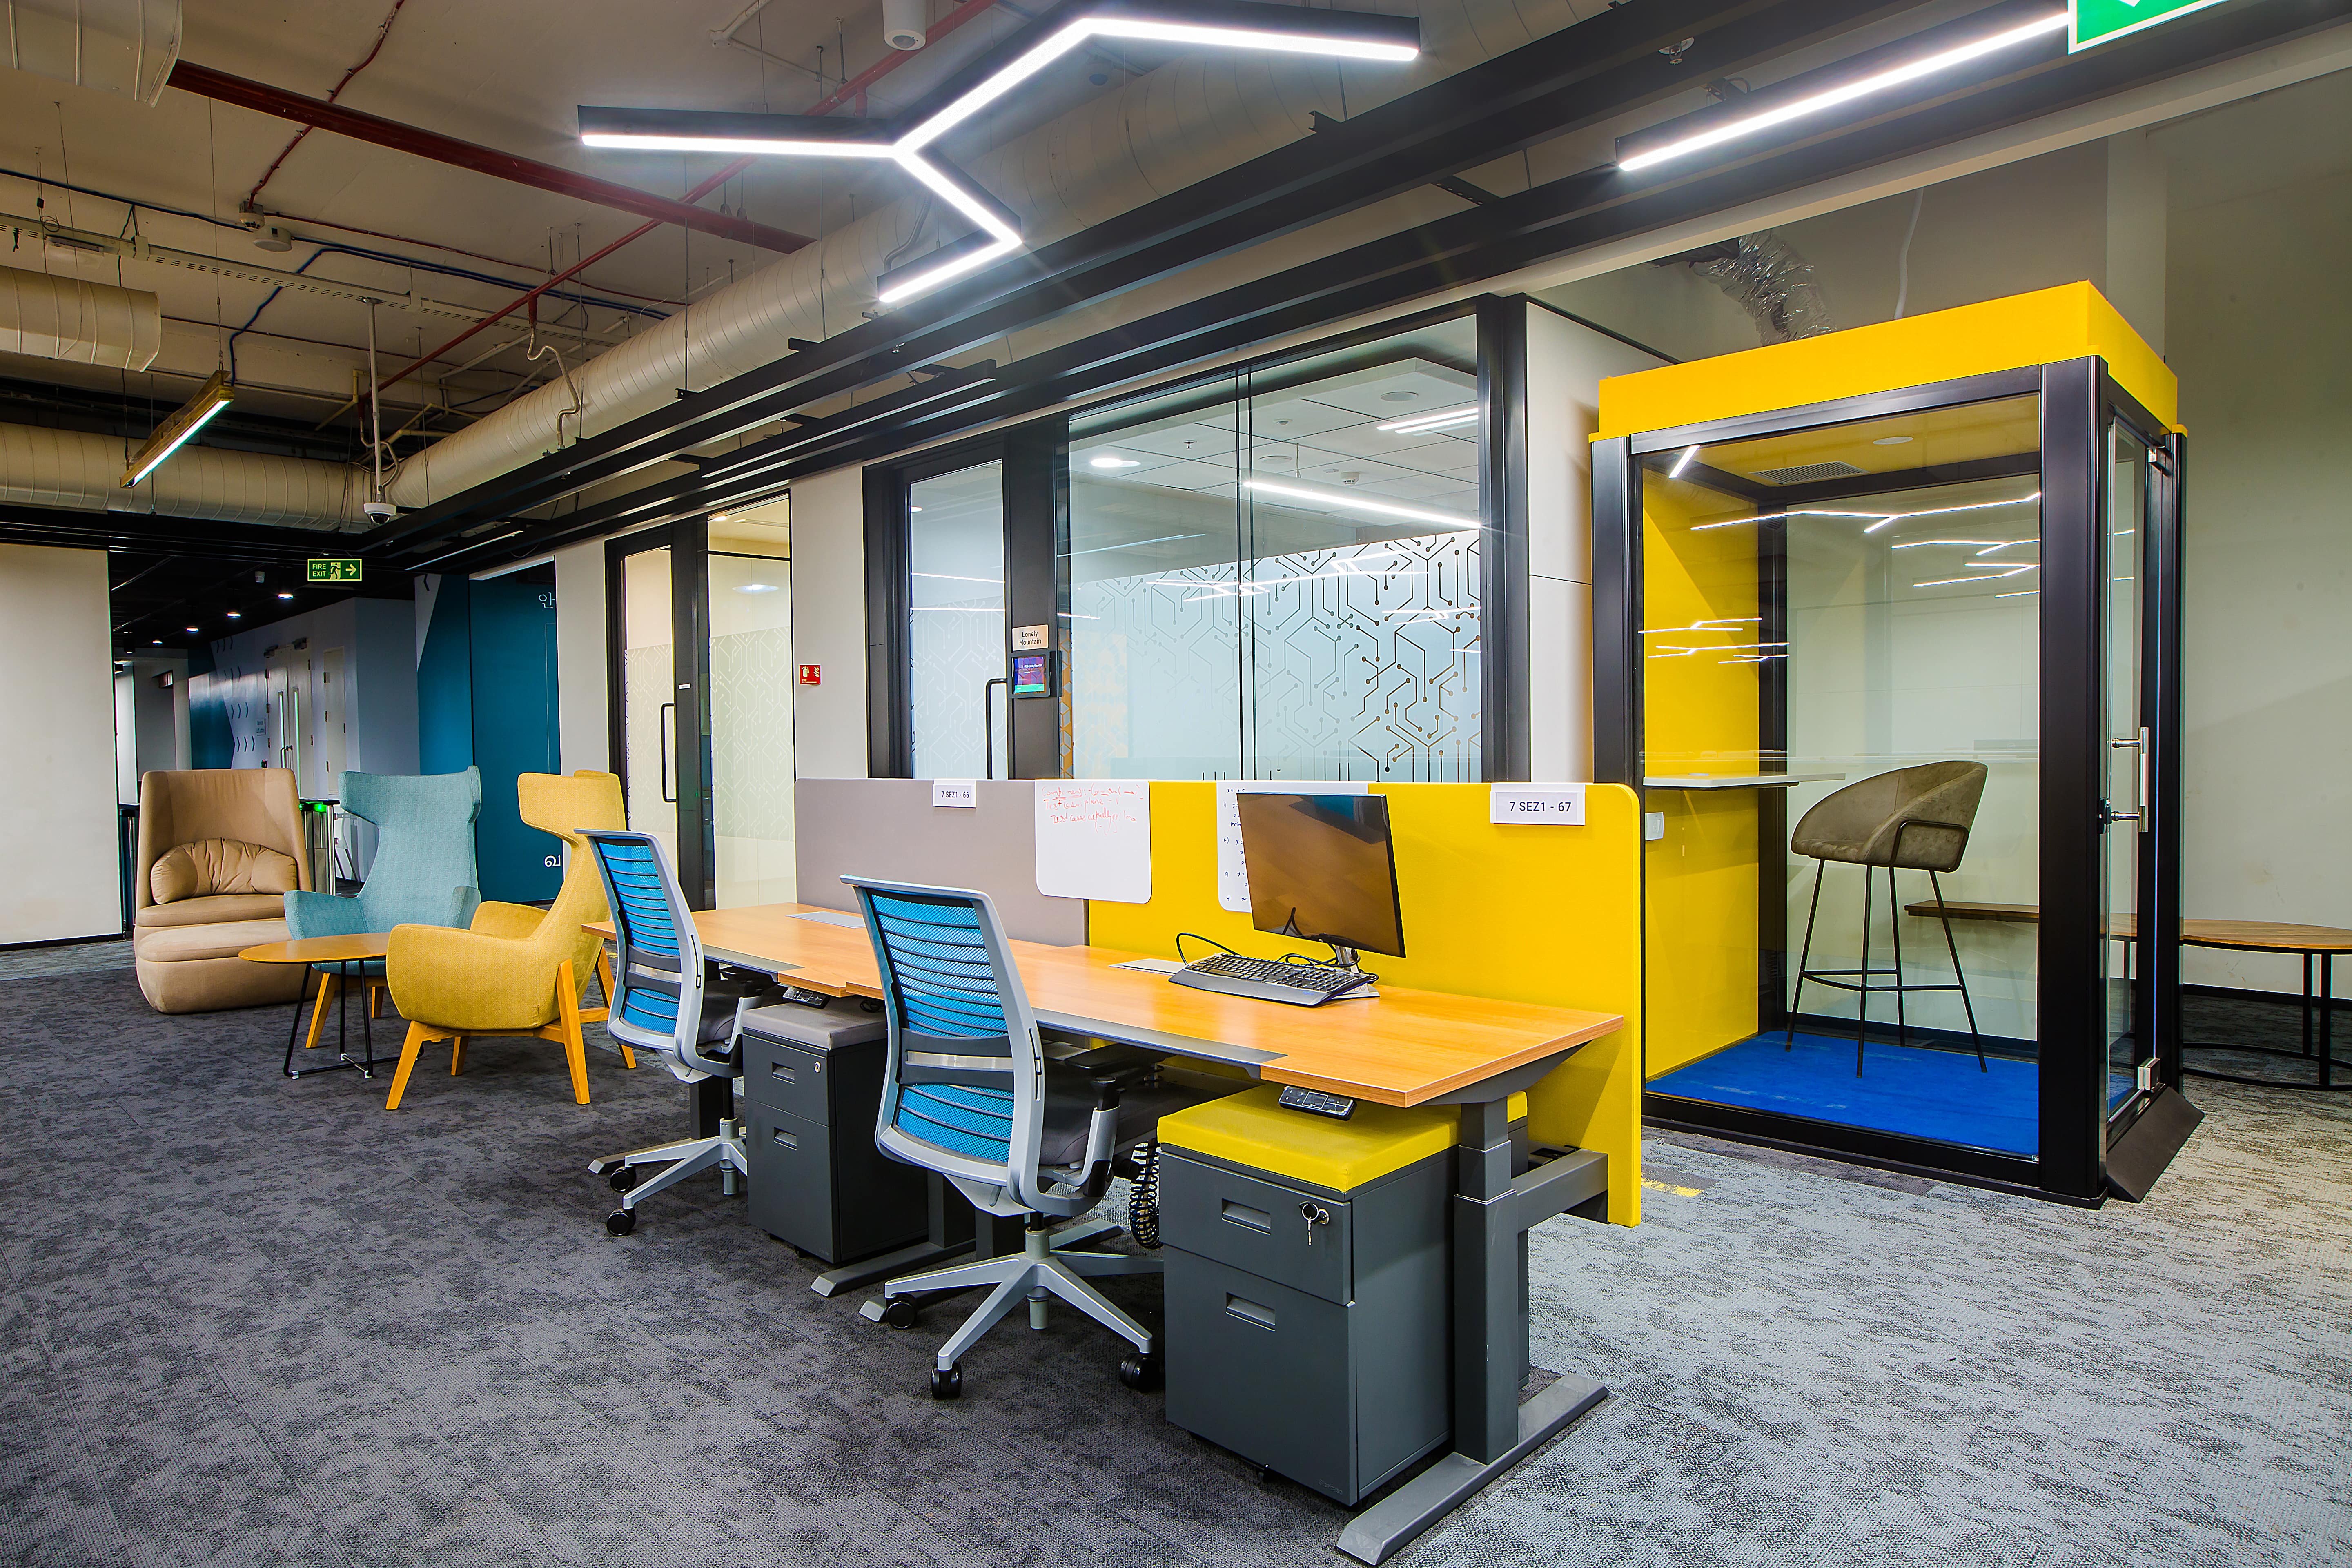 Ergonomic chairs and workstations and flexible seating options make the Rubric India office one of the best workplace designs